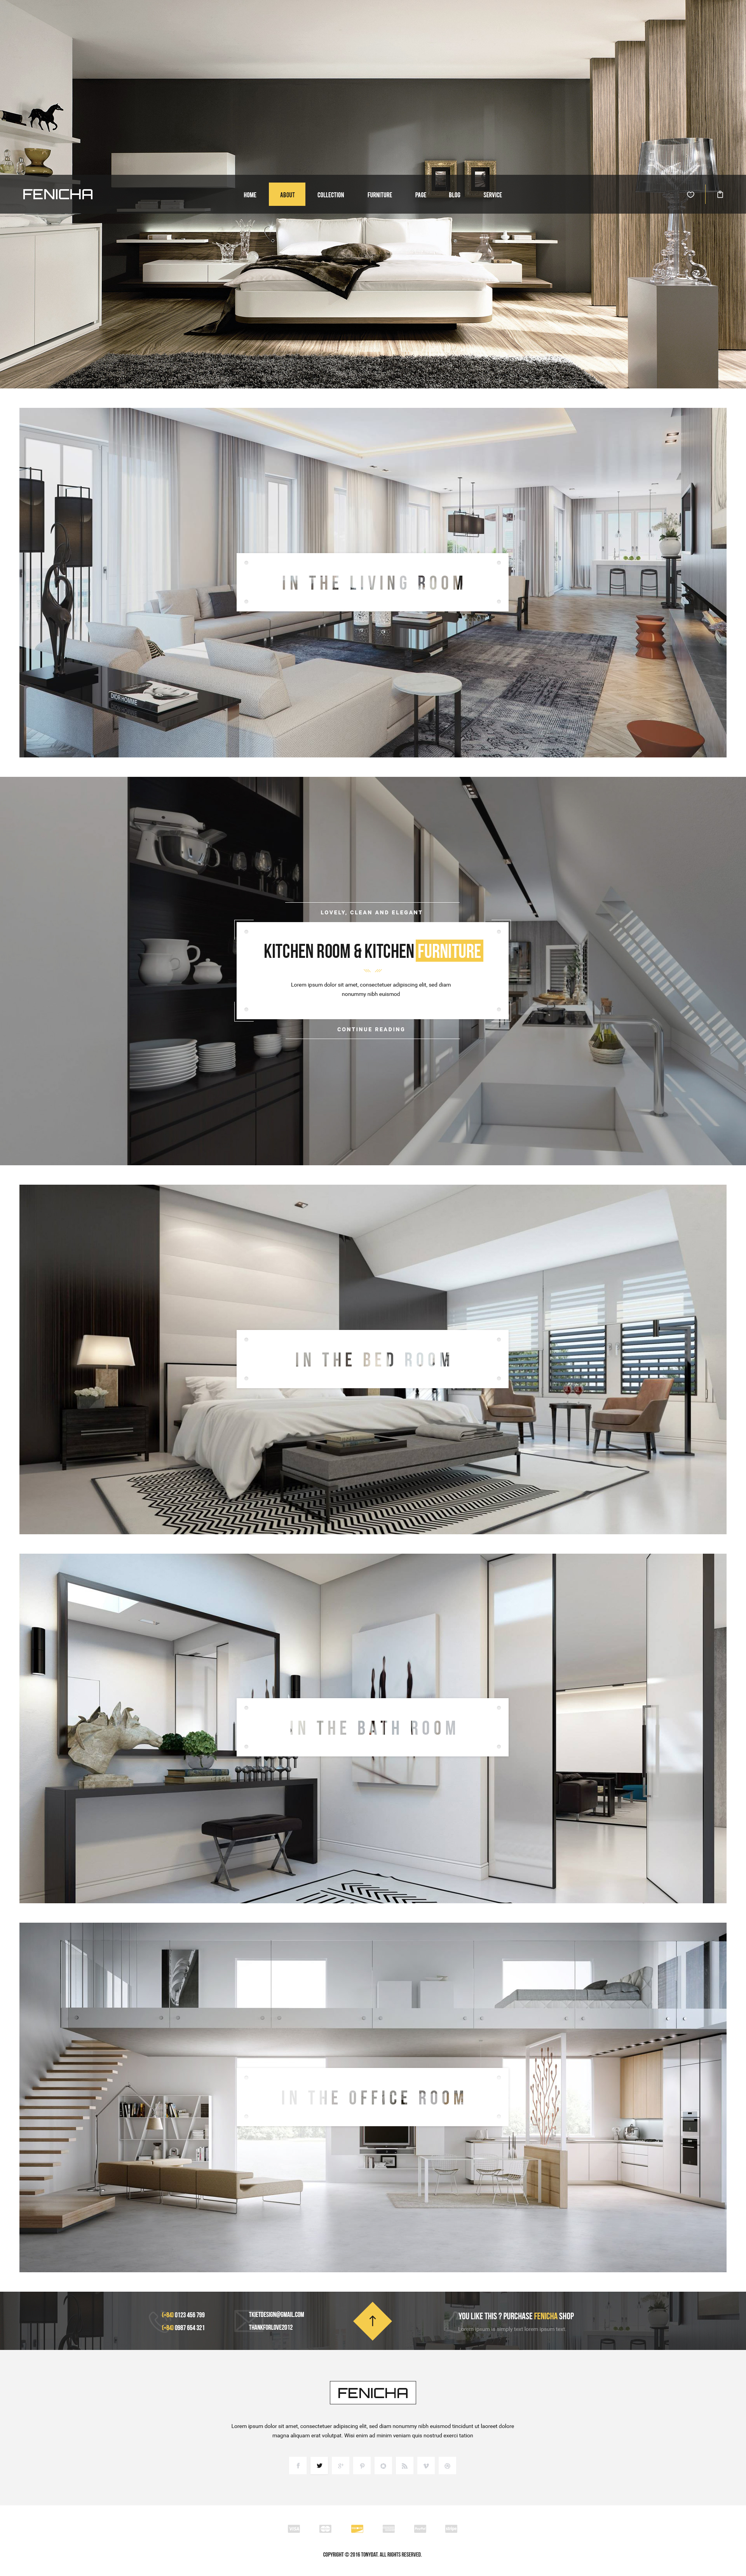 Fenicha - Interior & Furniture Store PSD Templates by tonydat ...  ... Previews/17-product-grid-4-columns-style-01.jpg Previews/18-product-grid-4-columns-style-02.jpg  Previews/19-product-grid-4-columns.jpg ...